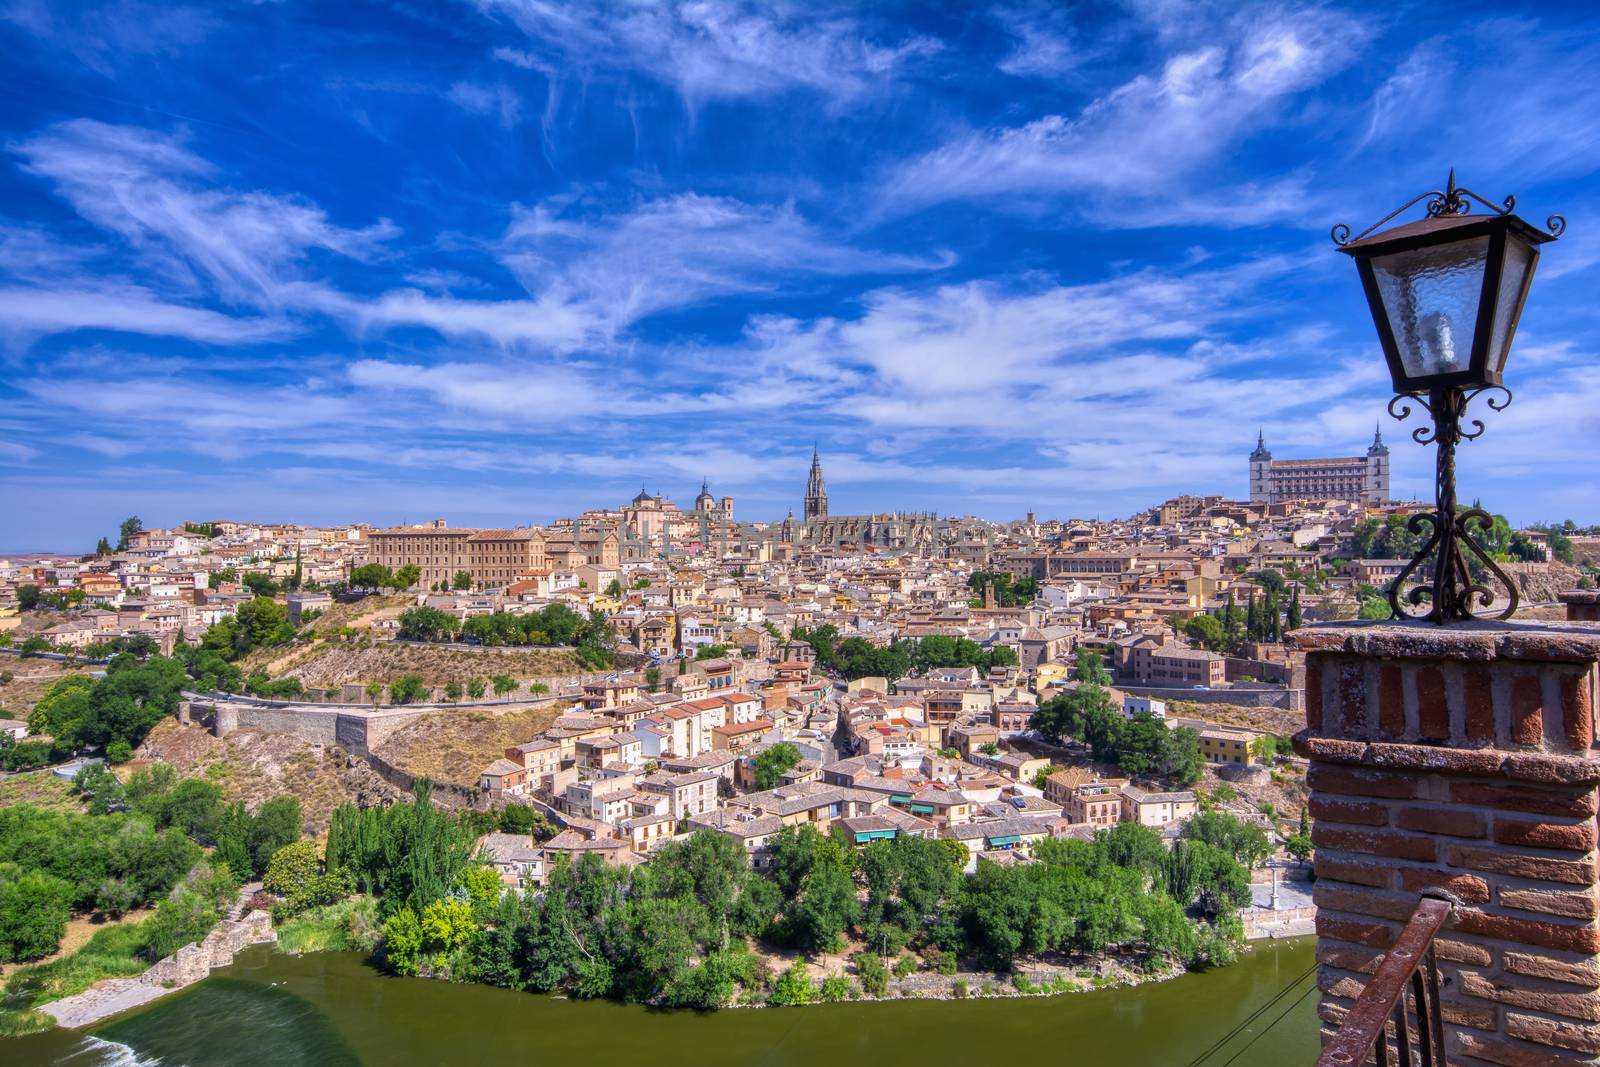 View of the historic city of Toledo with river Tagus, Spain. by CreativePhotoSpain